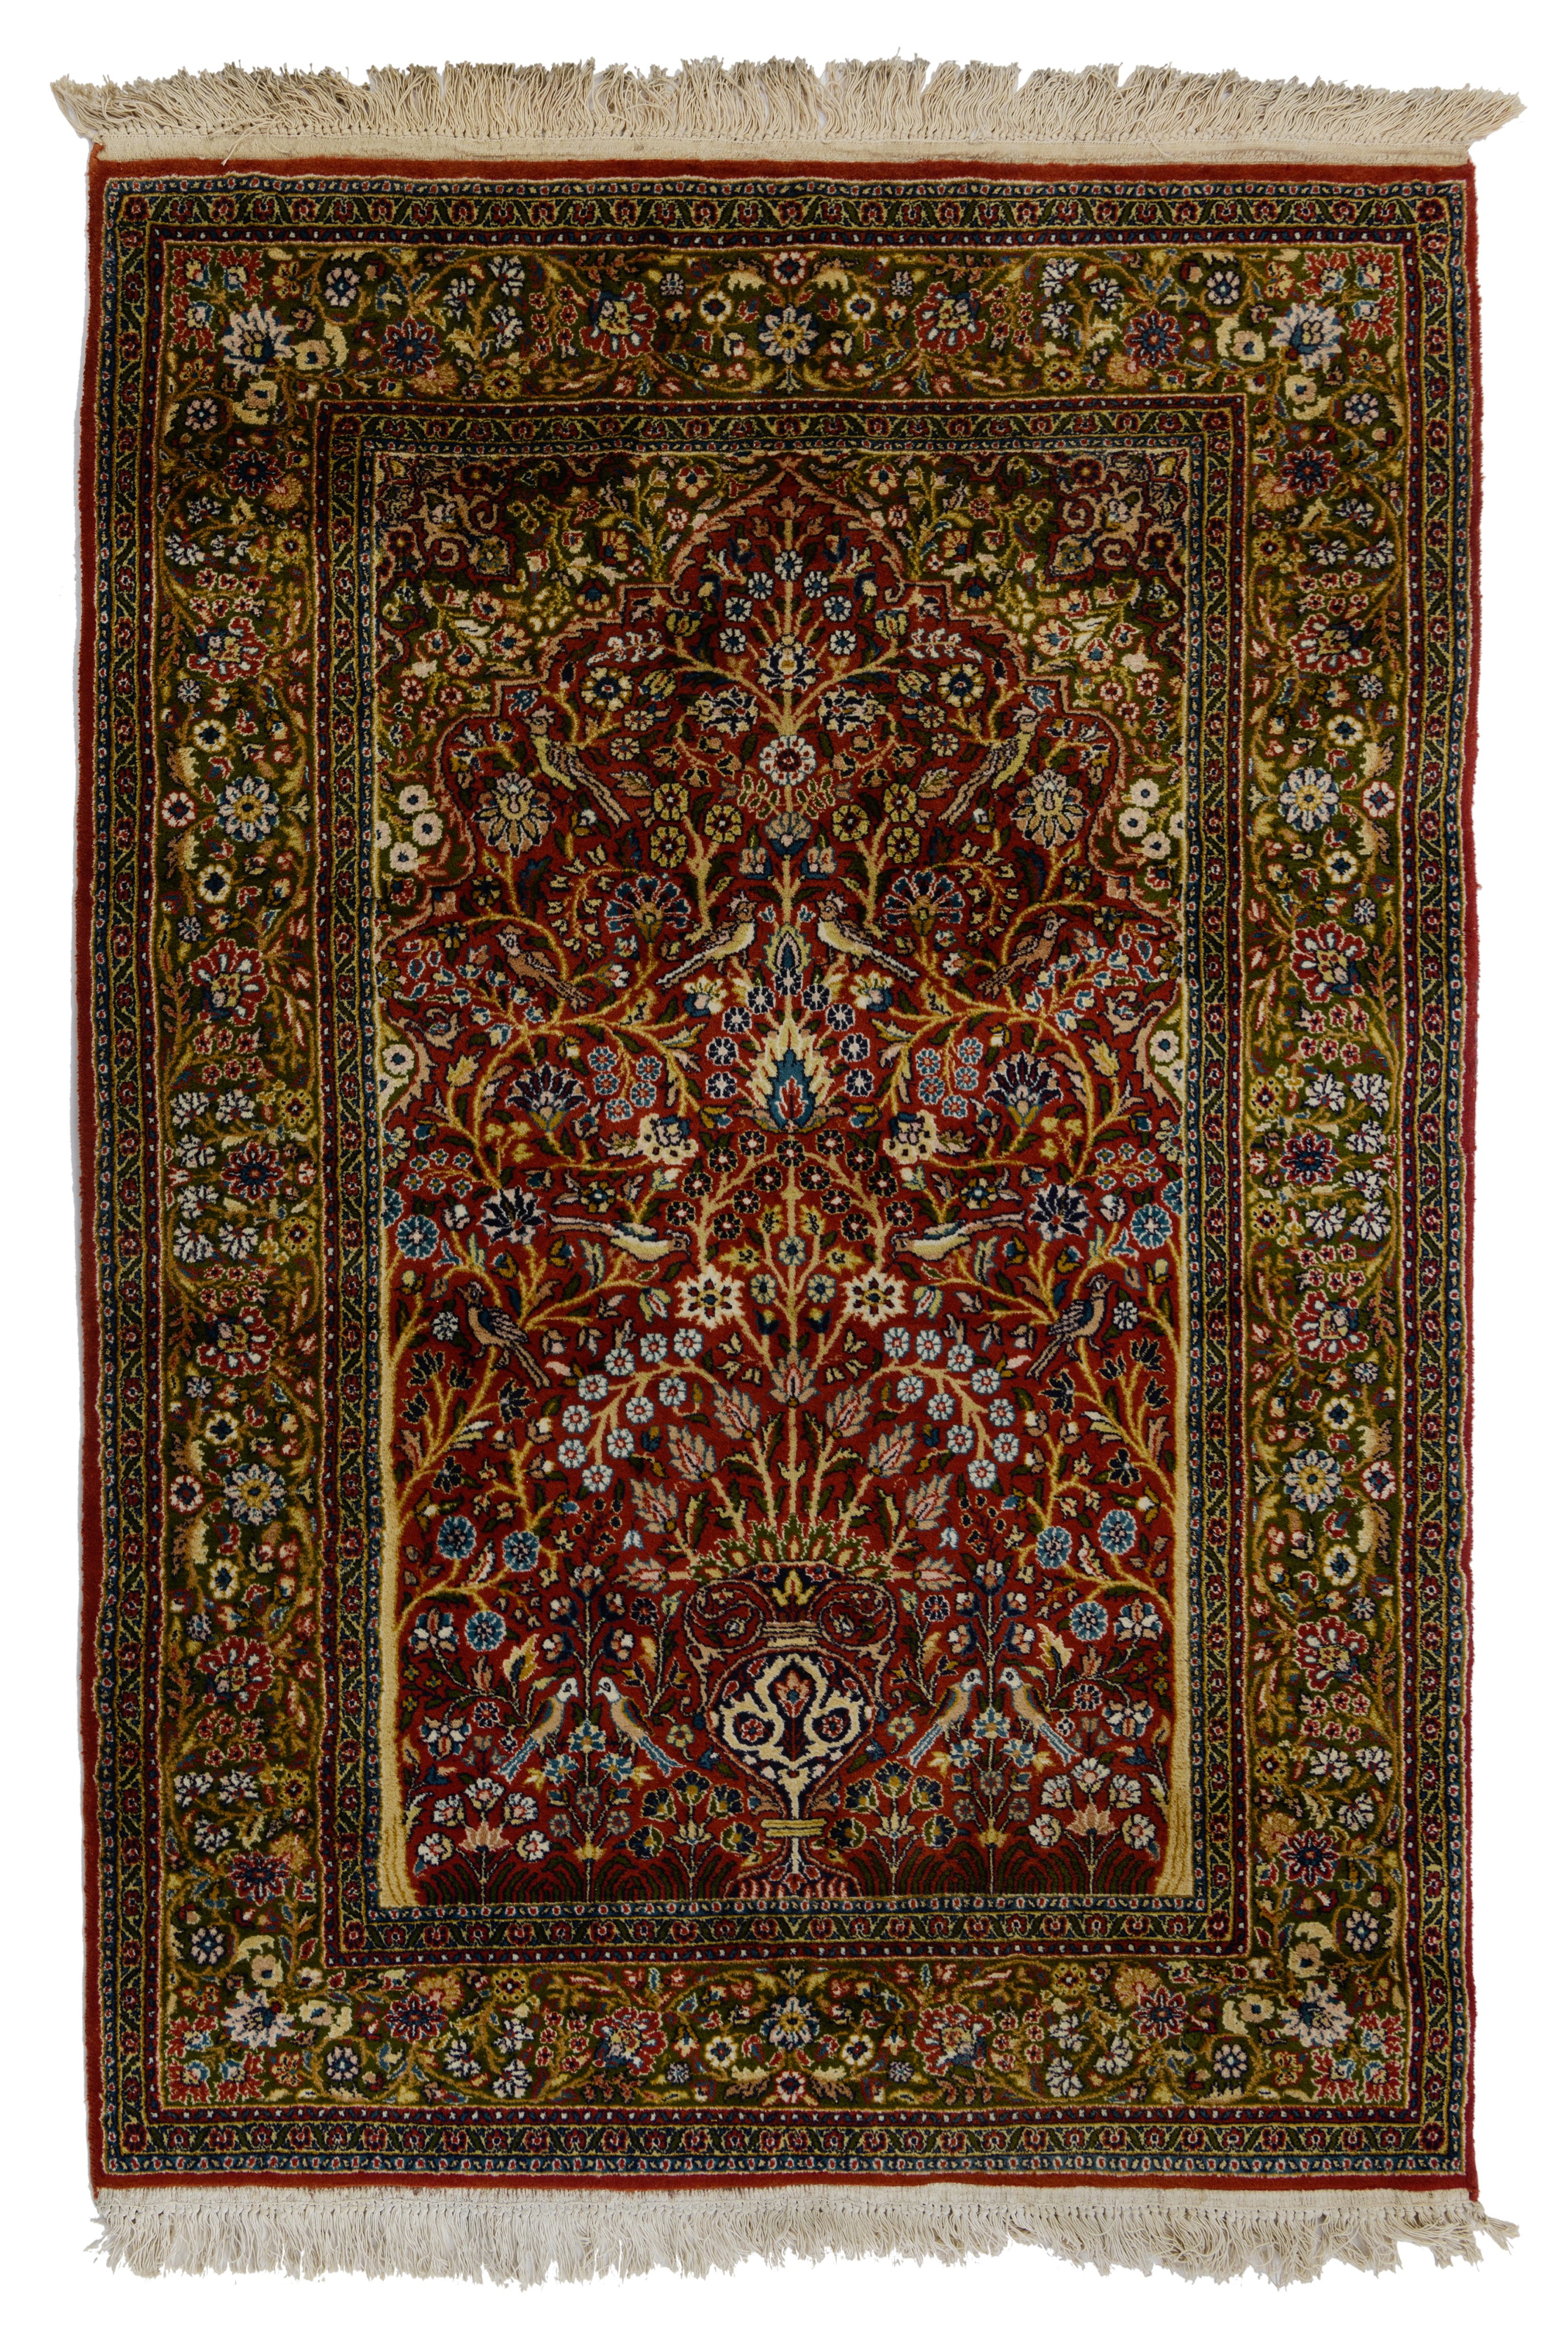 Two Oriental rugs, 123 x 170 / 128 x 180 cm - Image 3 of 5